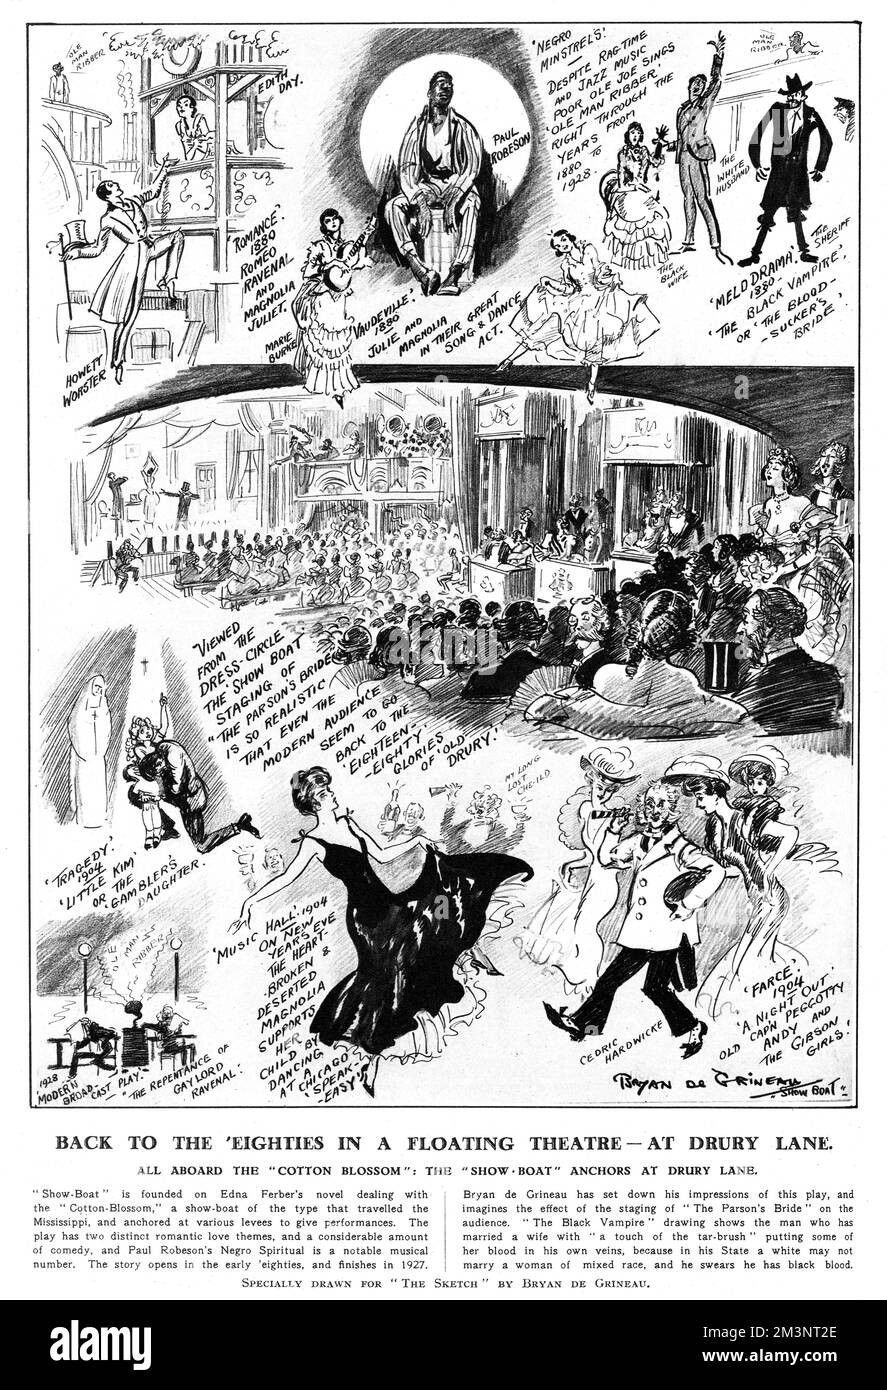 Impressions by illustrator Bryan de Grineau of the production of 'Show Boat' which opened on 3 May, 1928 at the Drury Lane theatre, London, and featured Paul Robeson in the role of Joe.     Date: May 1928 Stock Photo